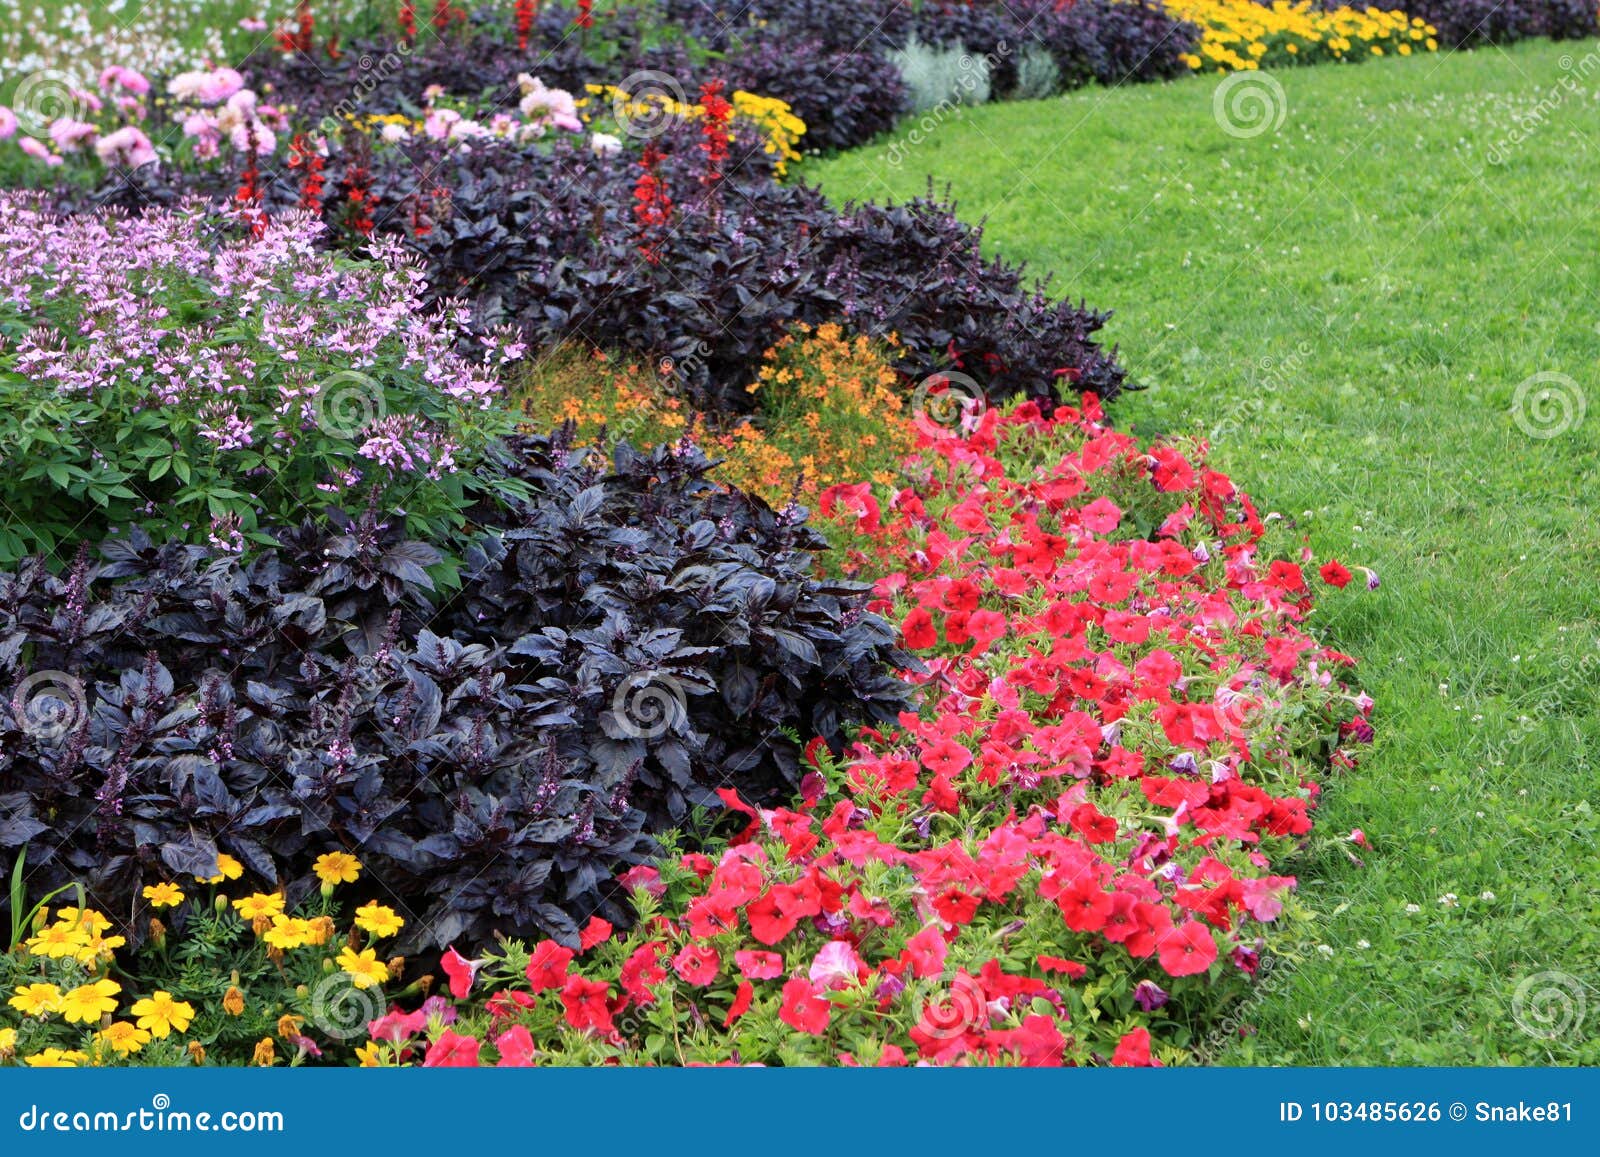 flowerbed in budapest stock photo. image of flora, spring - 103485626